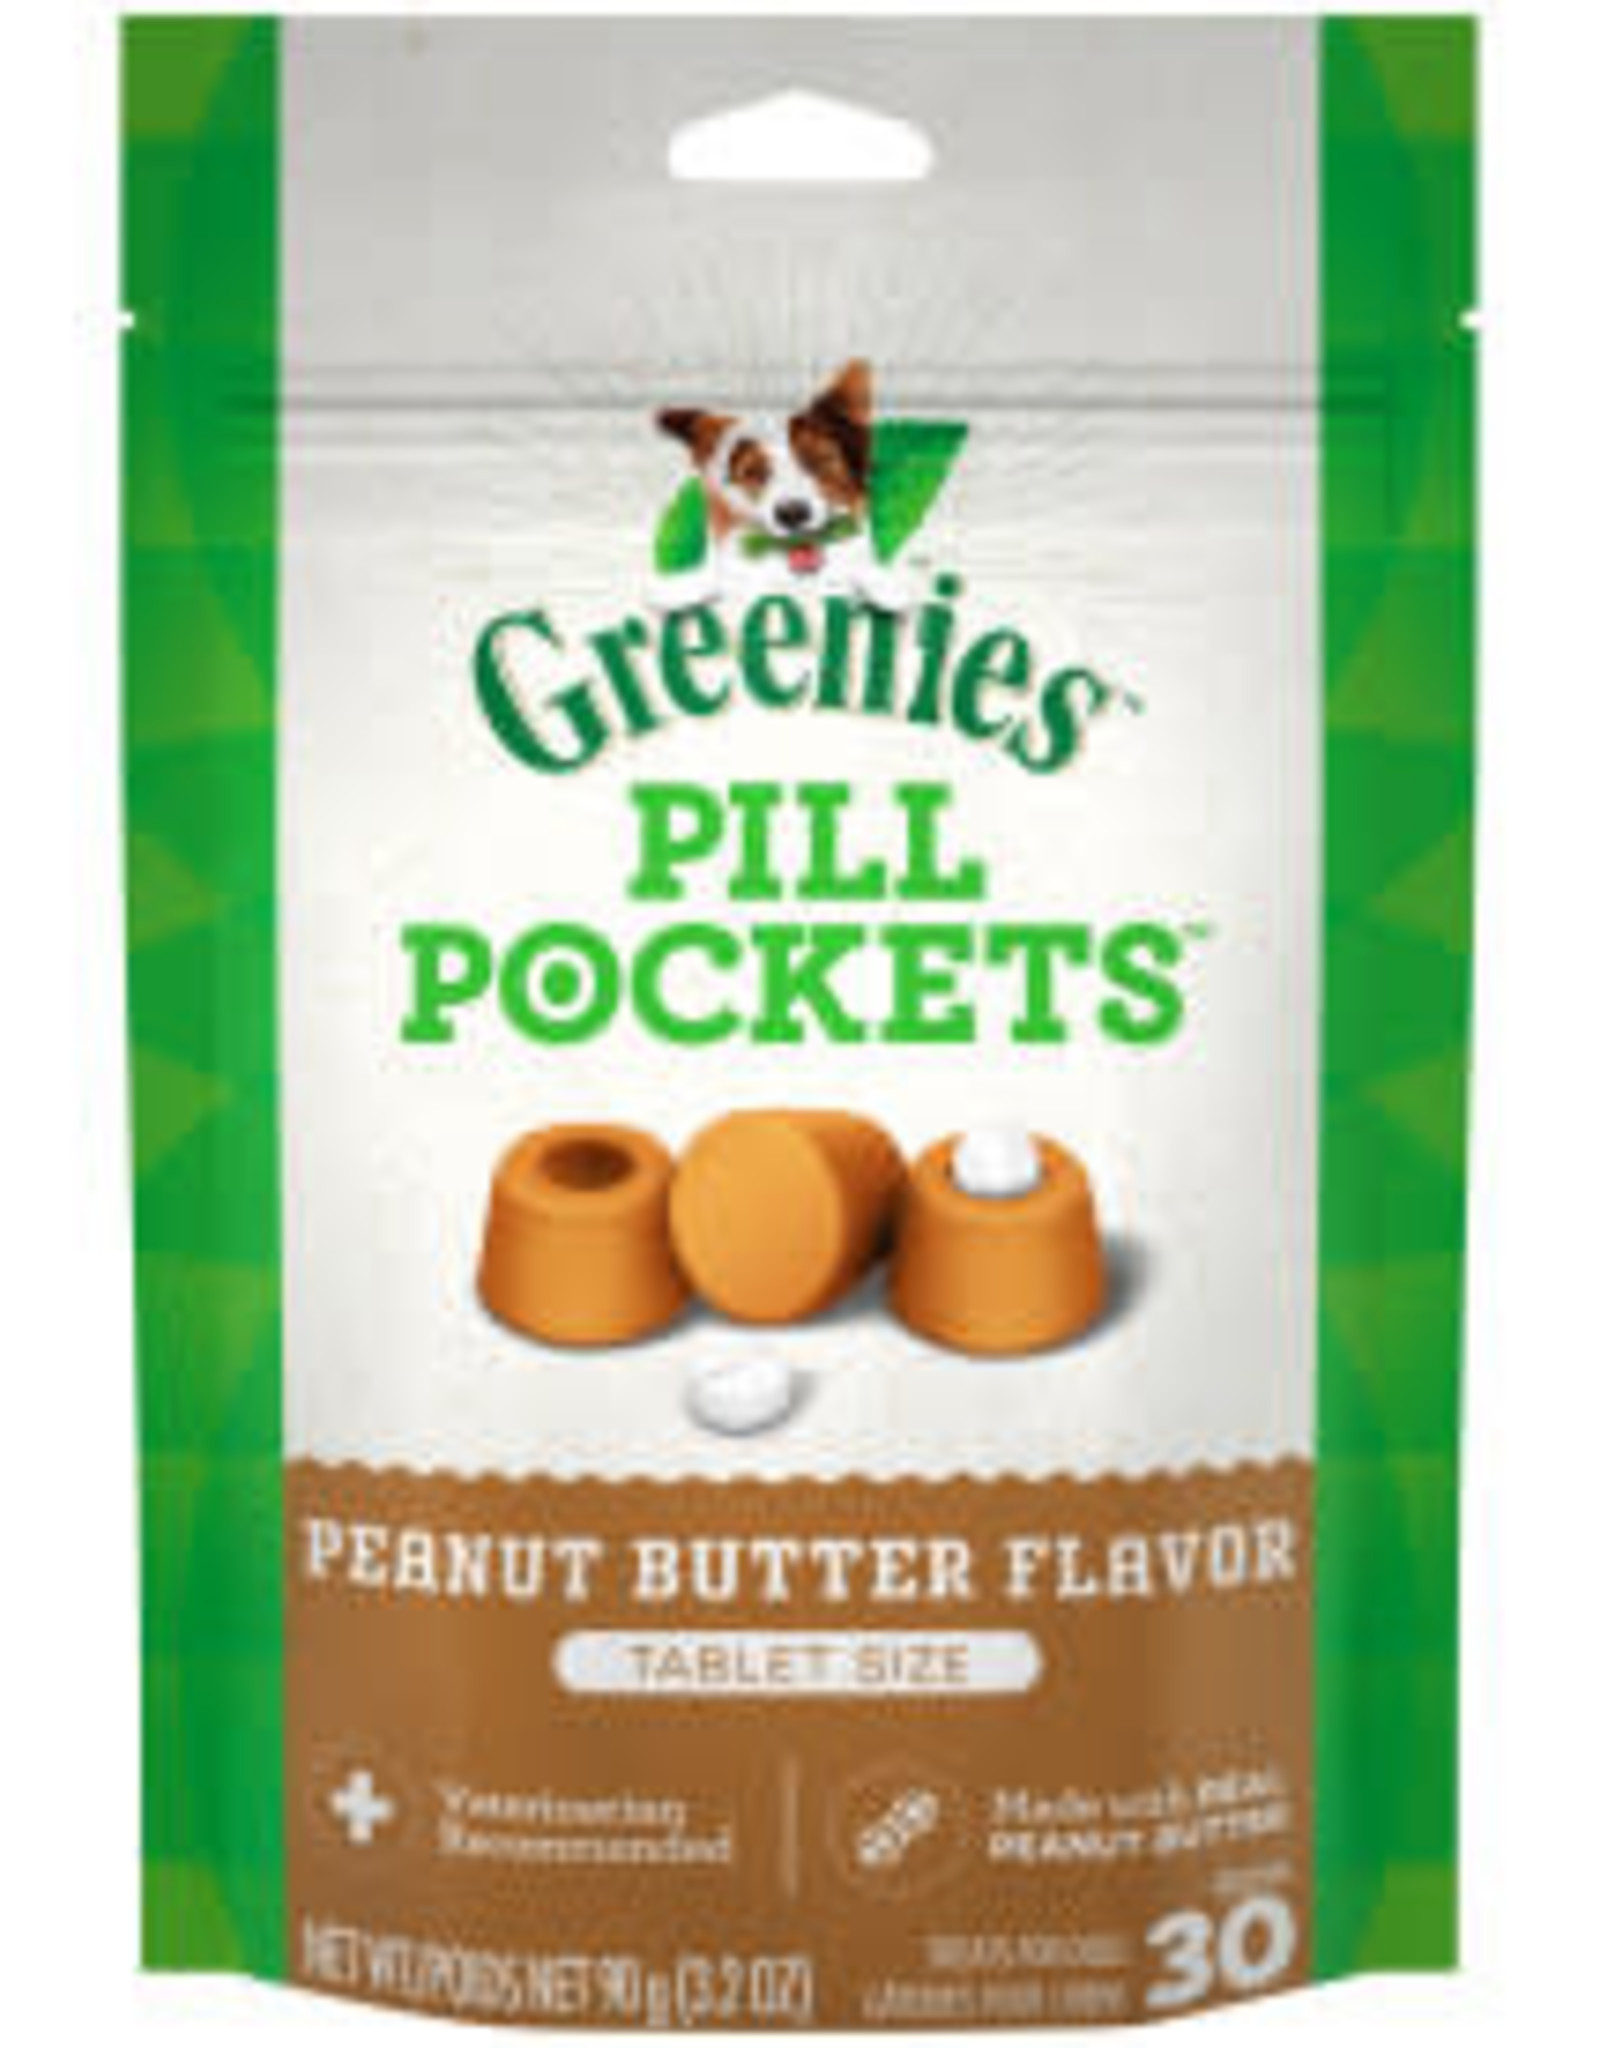 NUTRO COMPANY GREENIES PILL POCKETS Tablet Size Natural Dog Treats with Real Peanut Butter 3.2 oz